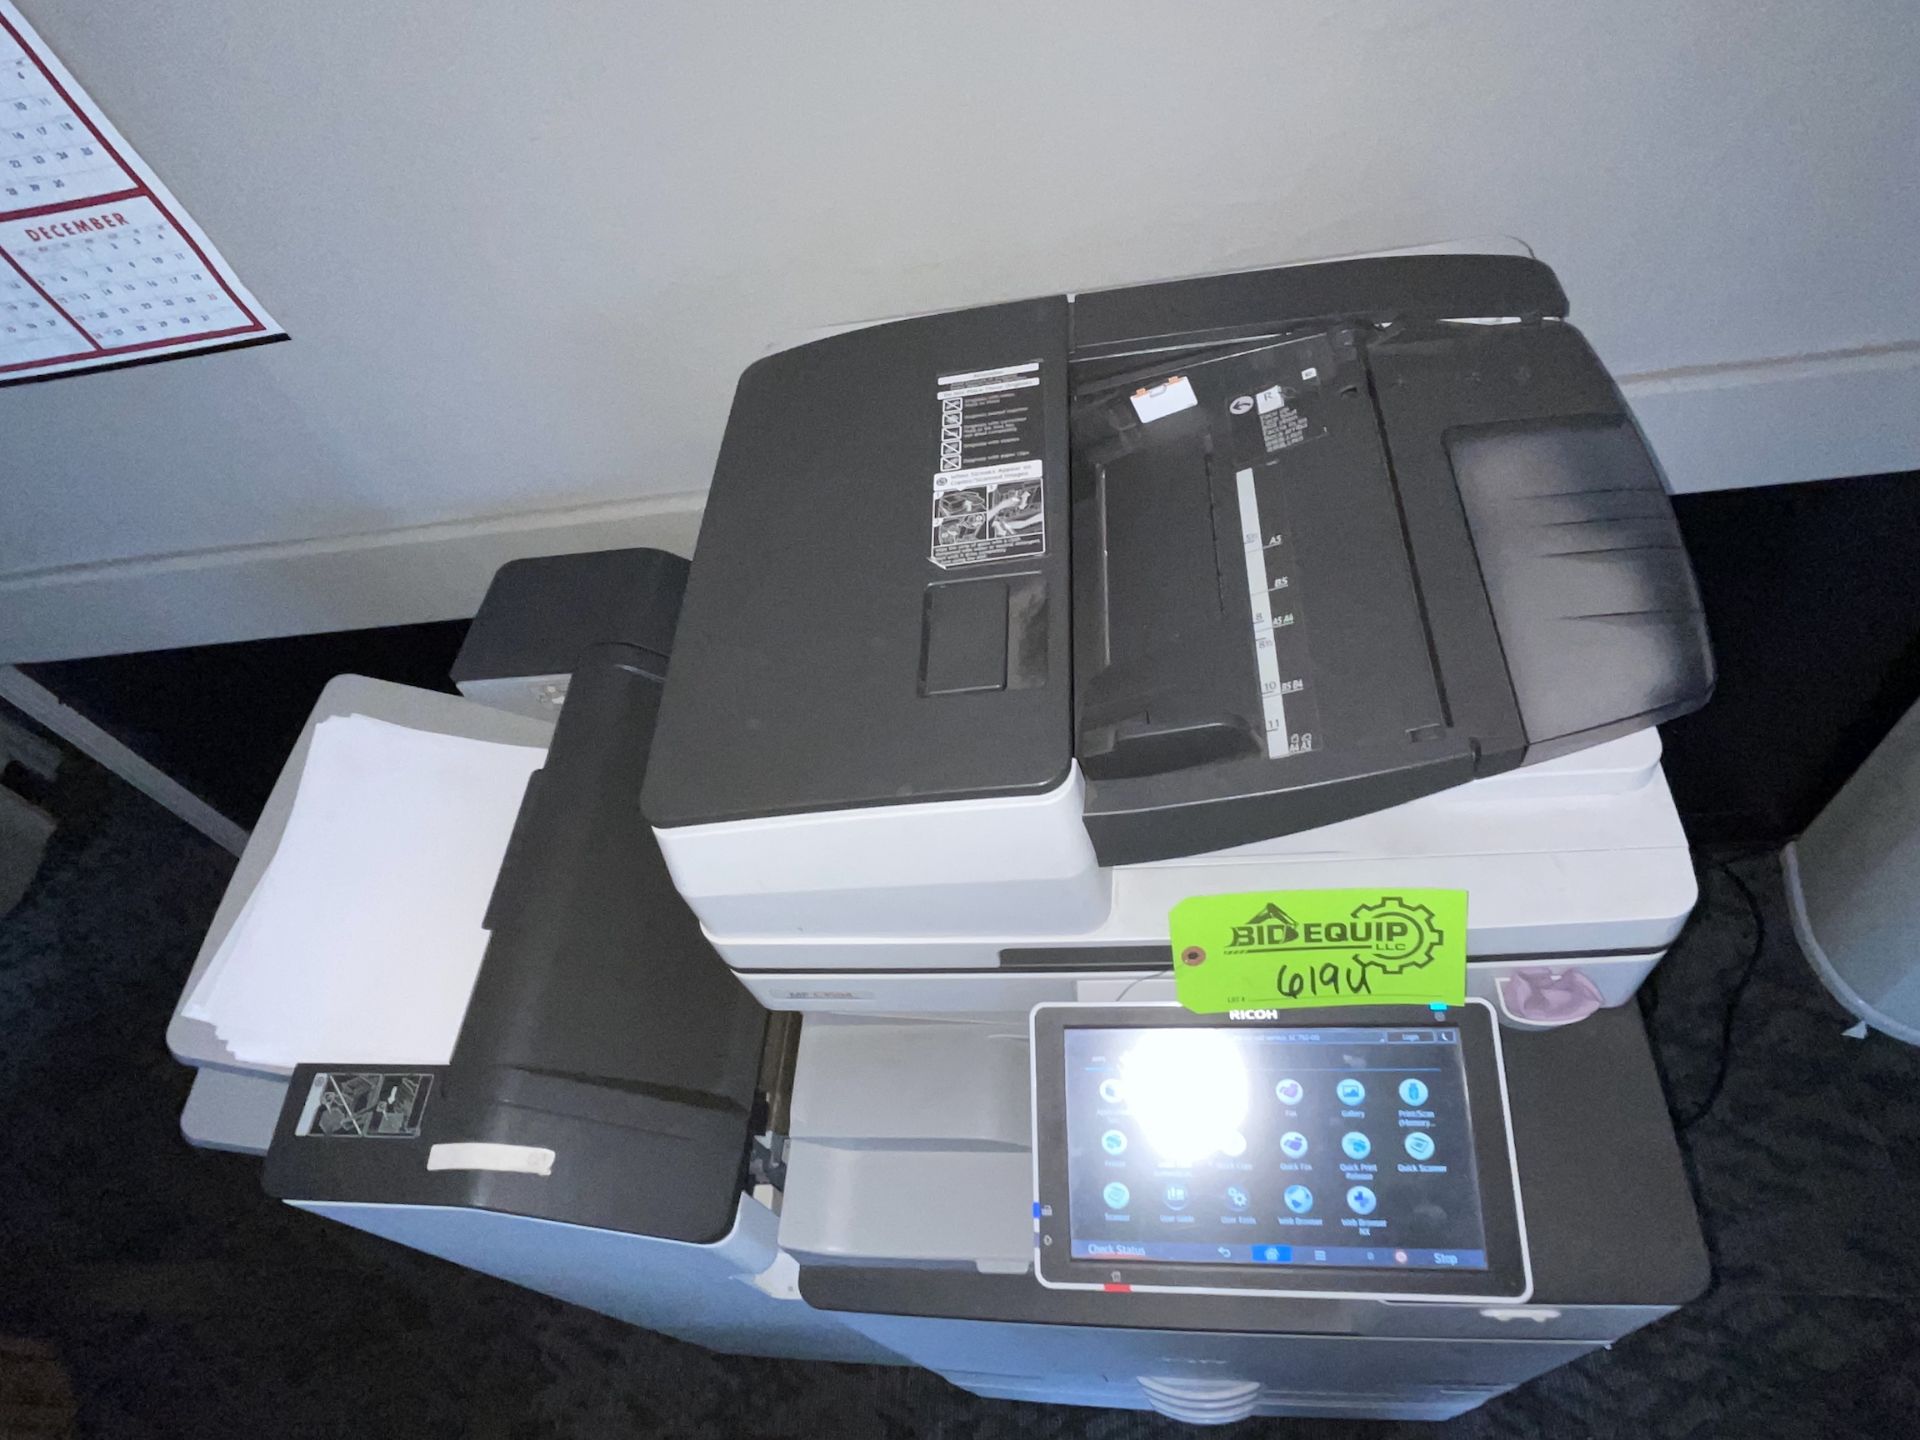 Ricoh MP C3504 3 in one Printer (619U) - Upland - Image 3 of 10